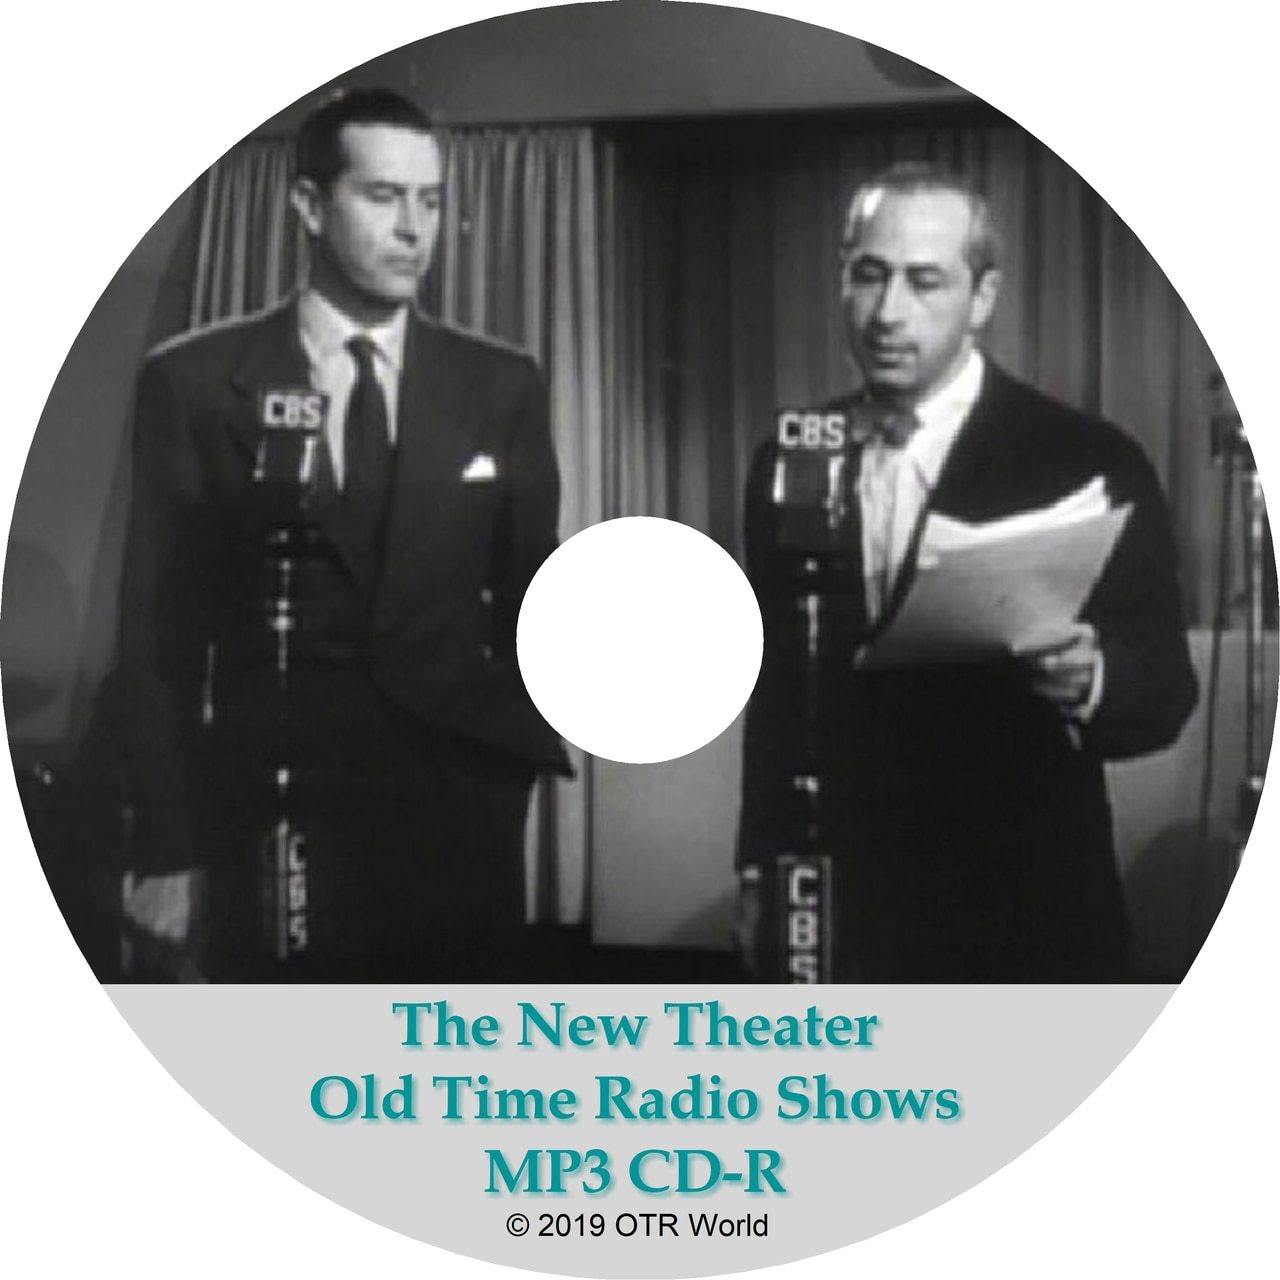 The New Theater Show Old Time Radio Shows OTR 4 Episodes MP3 CD-R - OTR World